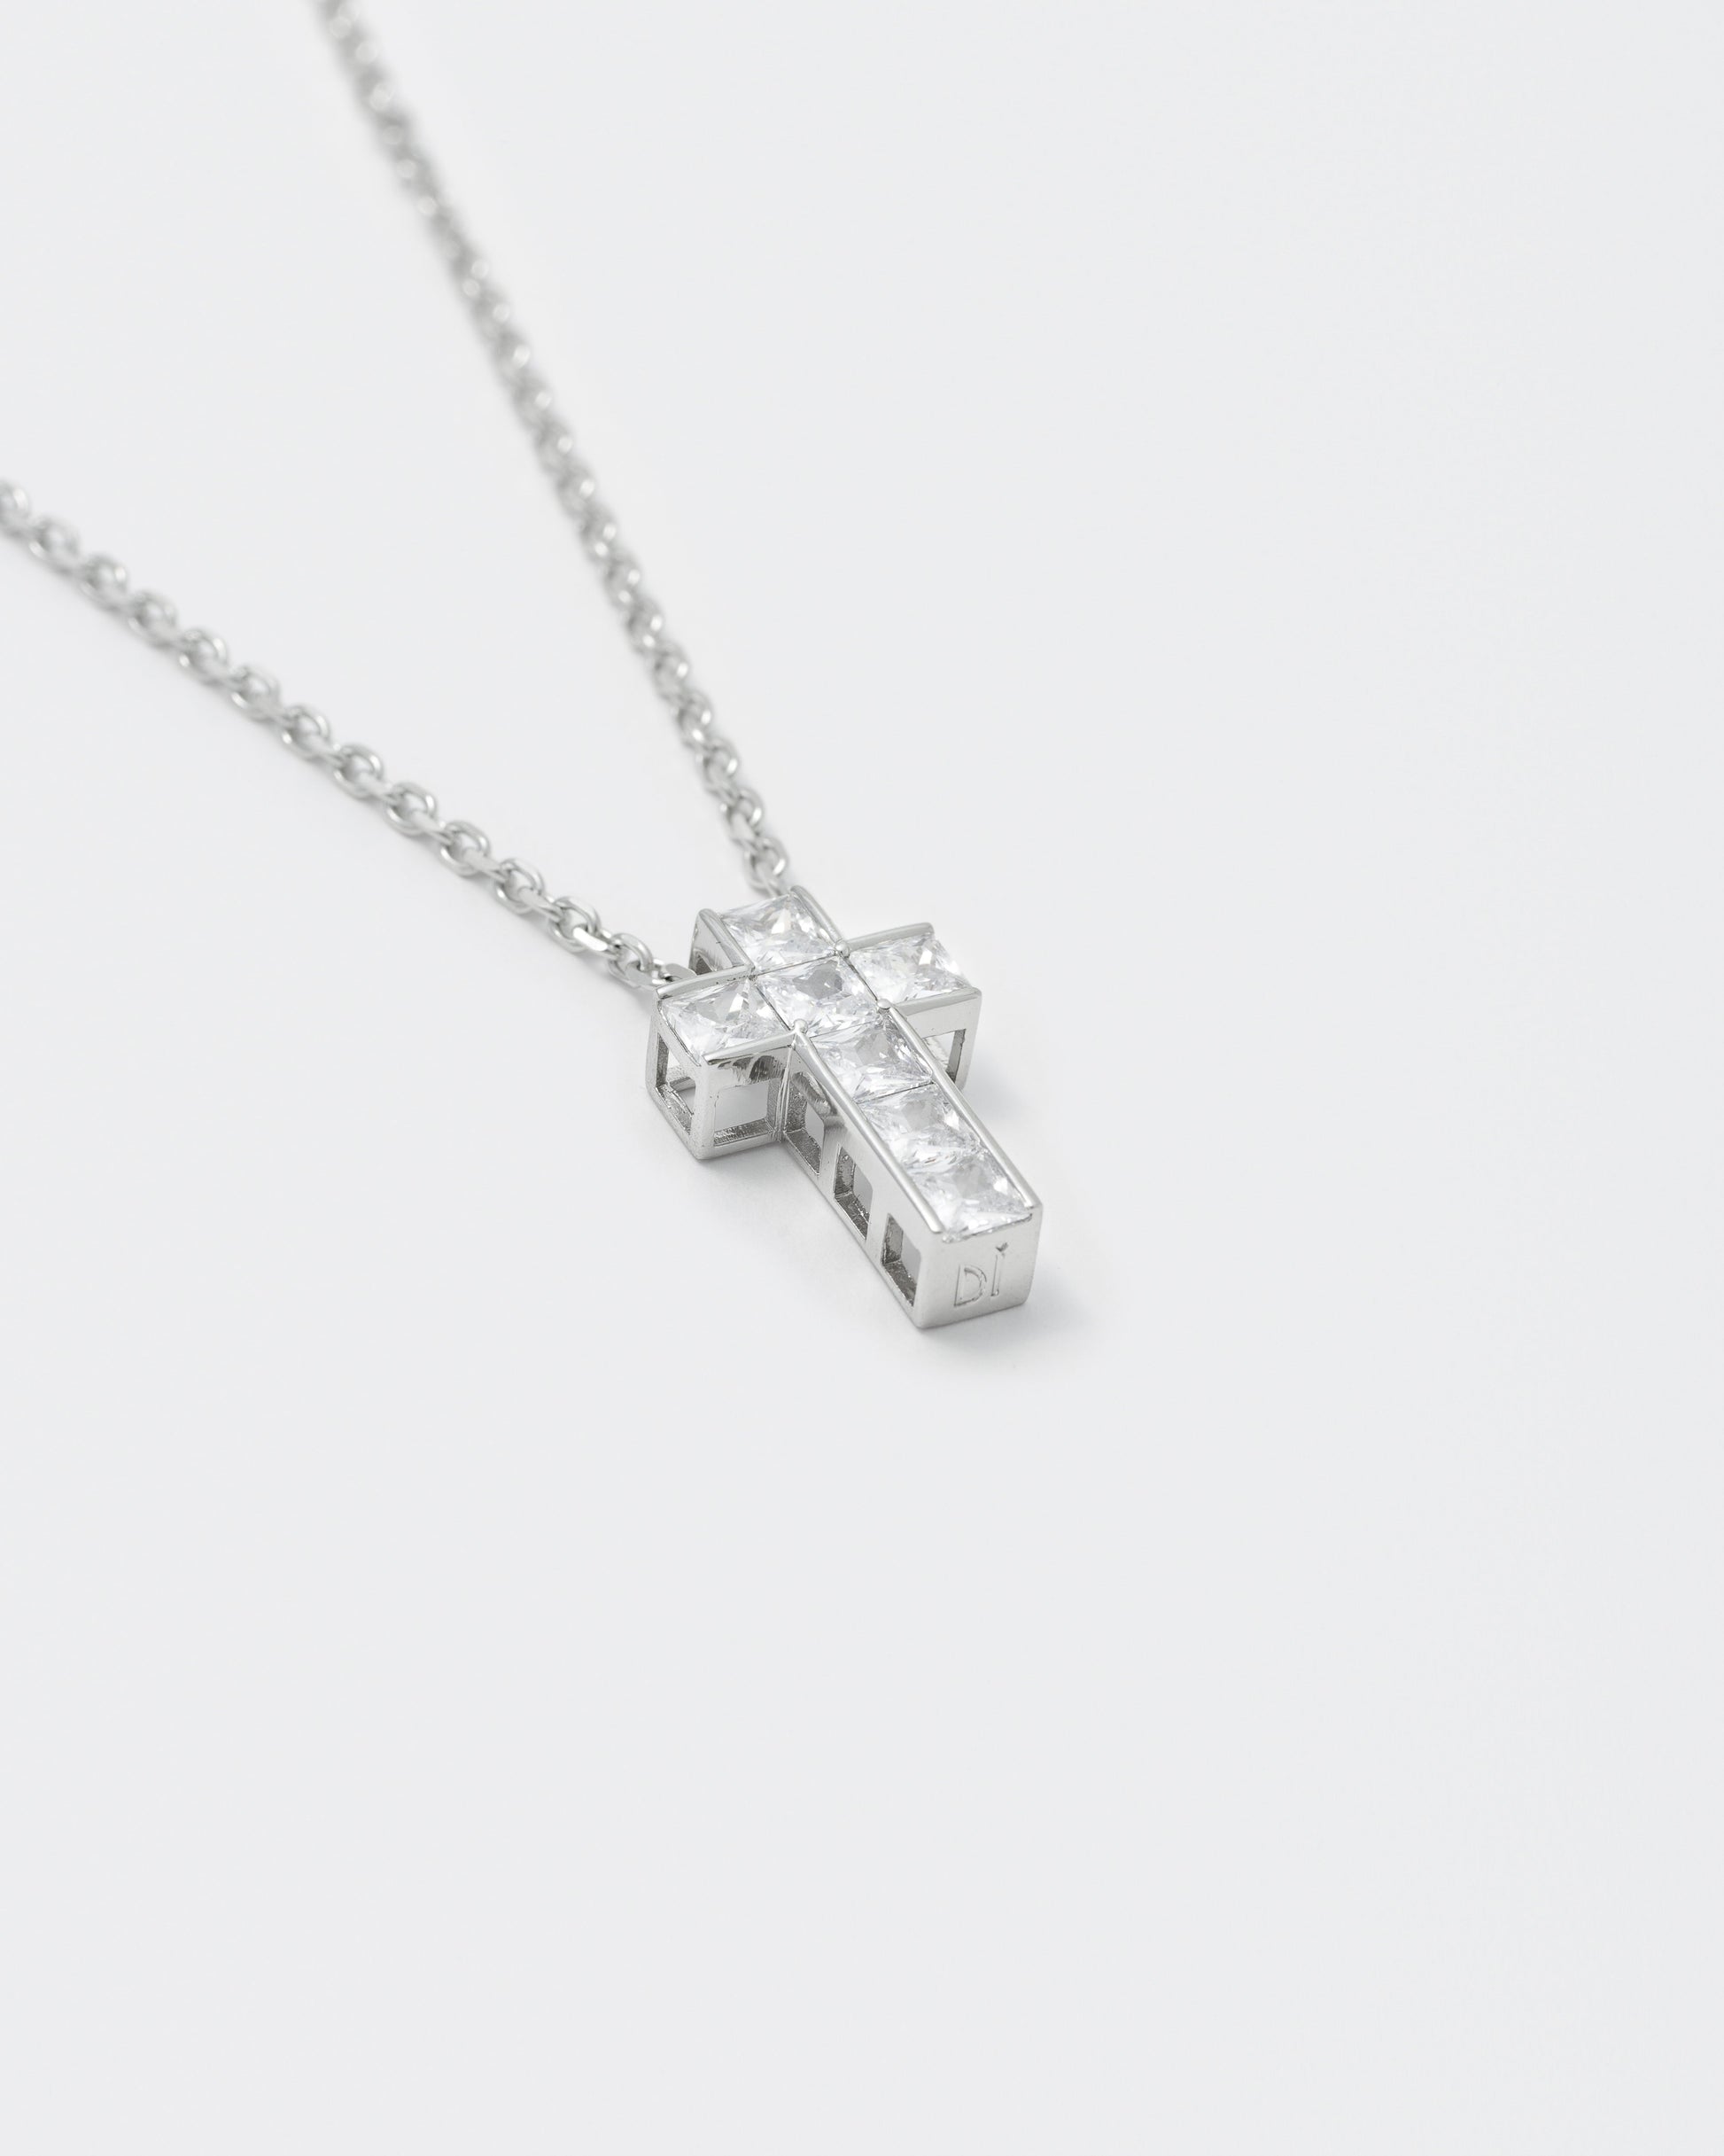 detail of 18k white gold coated cross pendant necklace with hand-set princess-cut stones in white and 3mm box chain